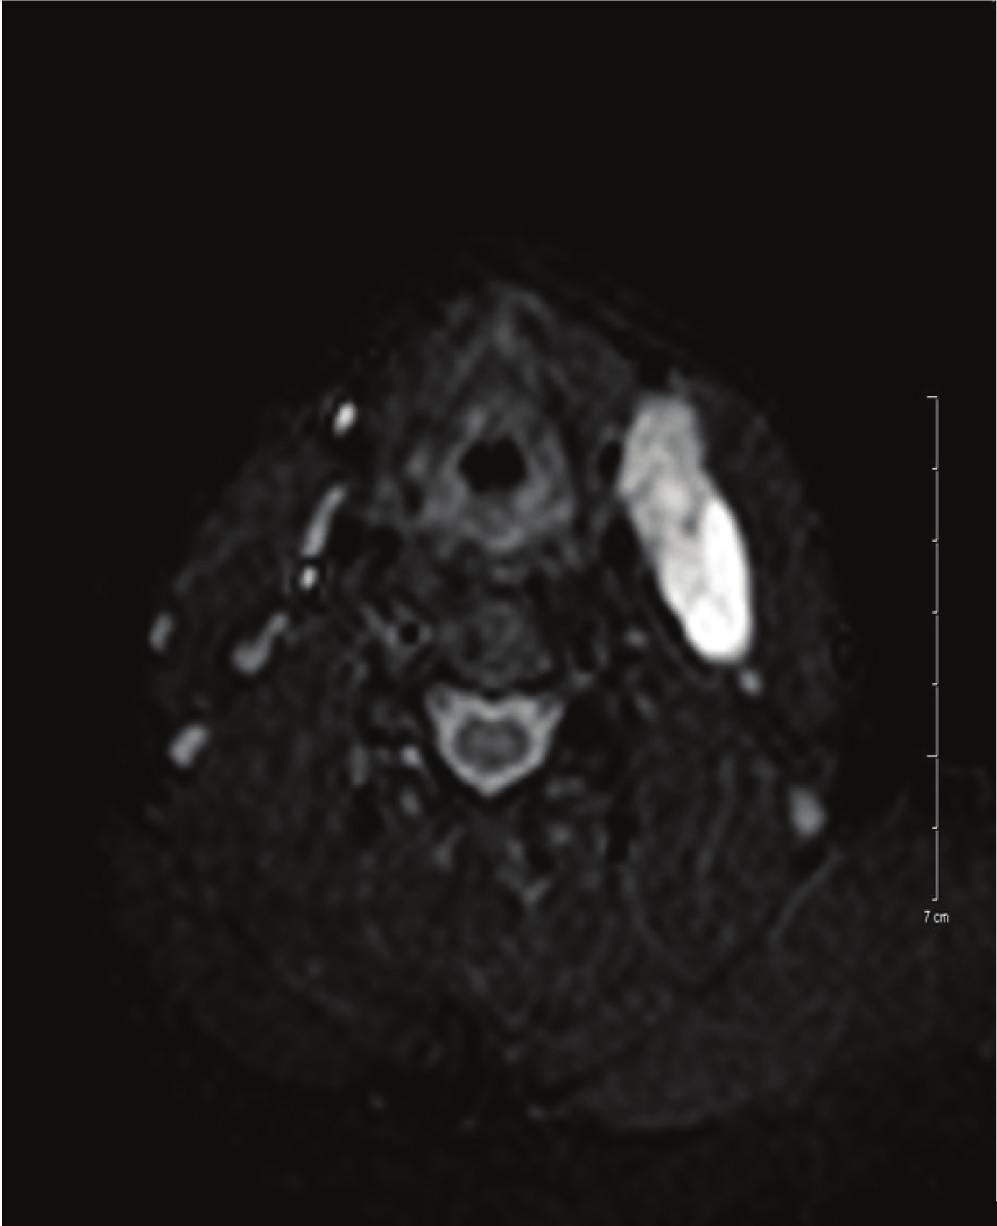 2 Case Reports in Otolaryngology after histopathological examination it was diagnosed to be a cystic enlarged lymph node which was also invaded with thyroid papillary carcinoma, with the review of